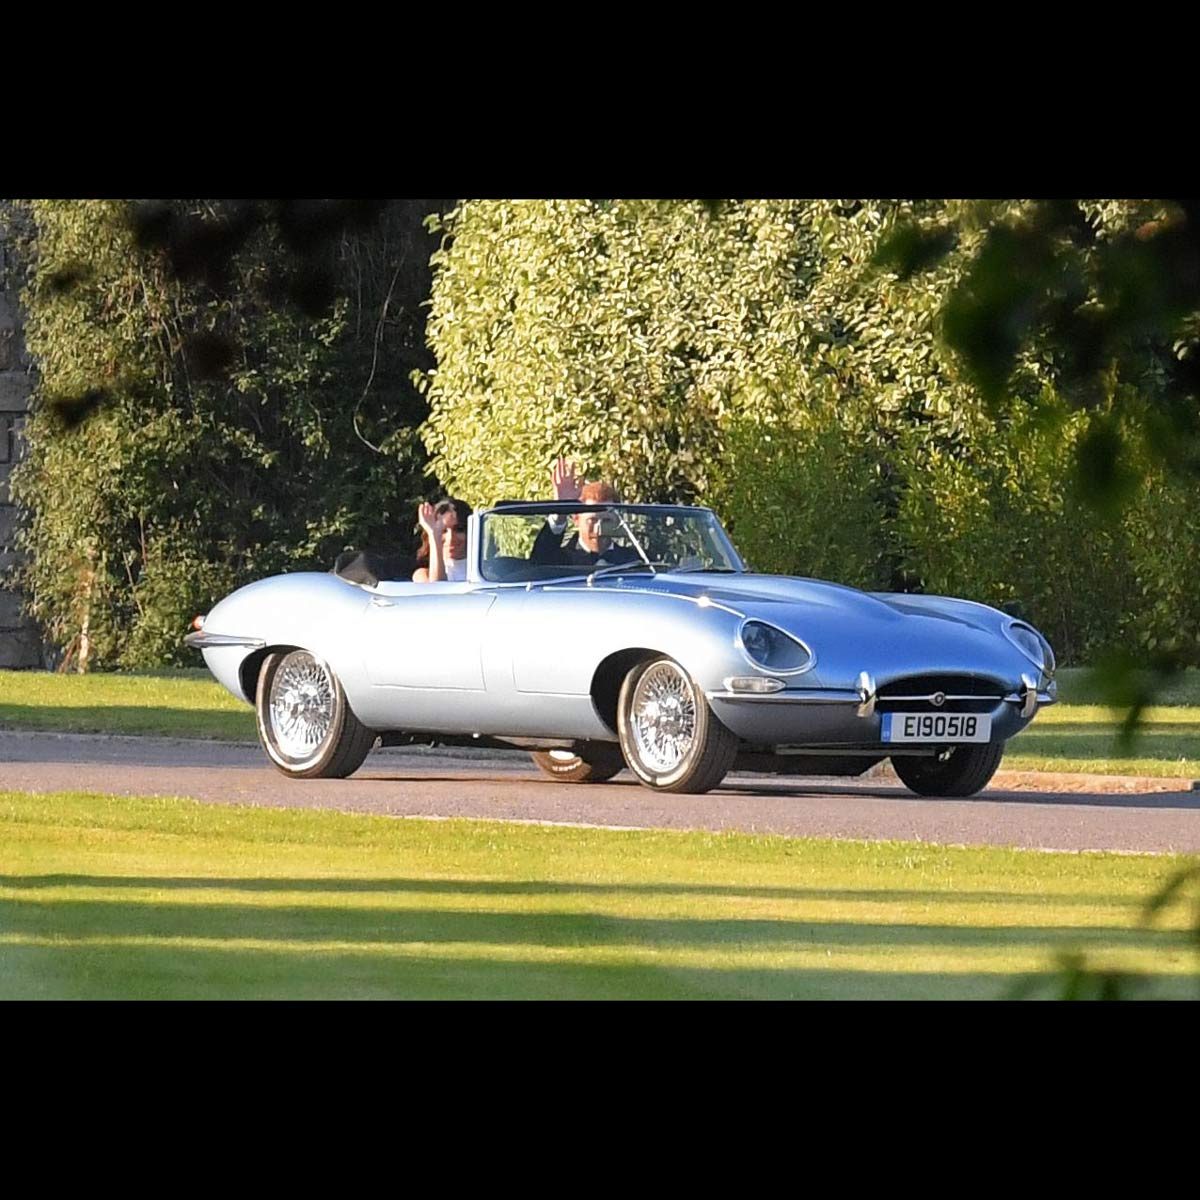 Prince Harry and Meghan Markle wave as they drive away in a Jaguar E-type following their wedding